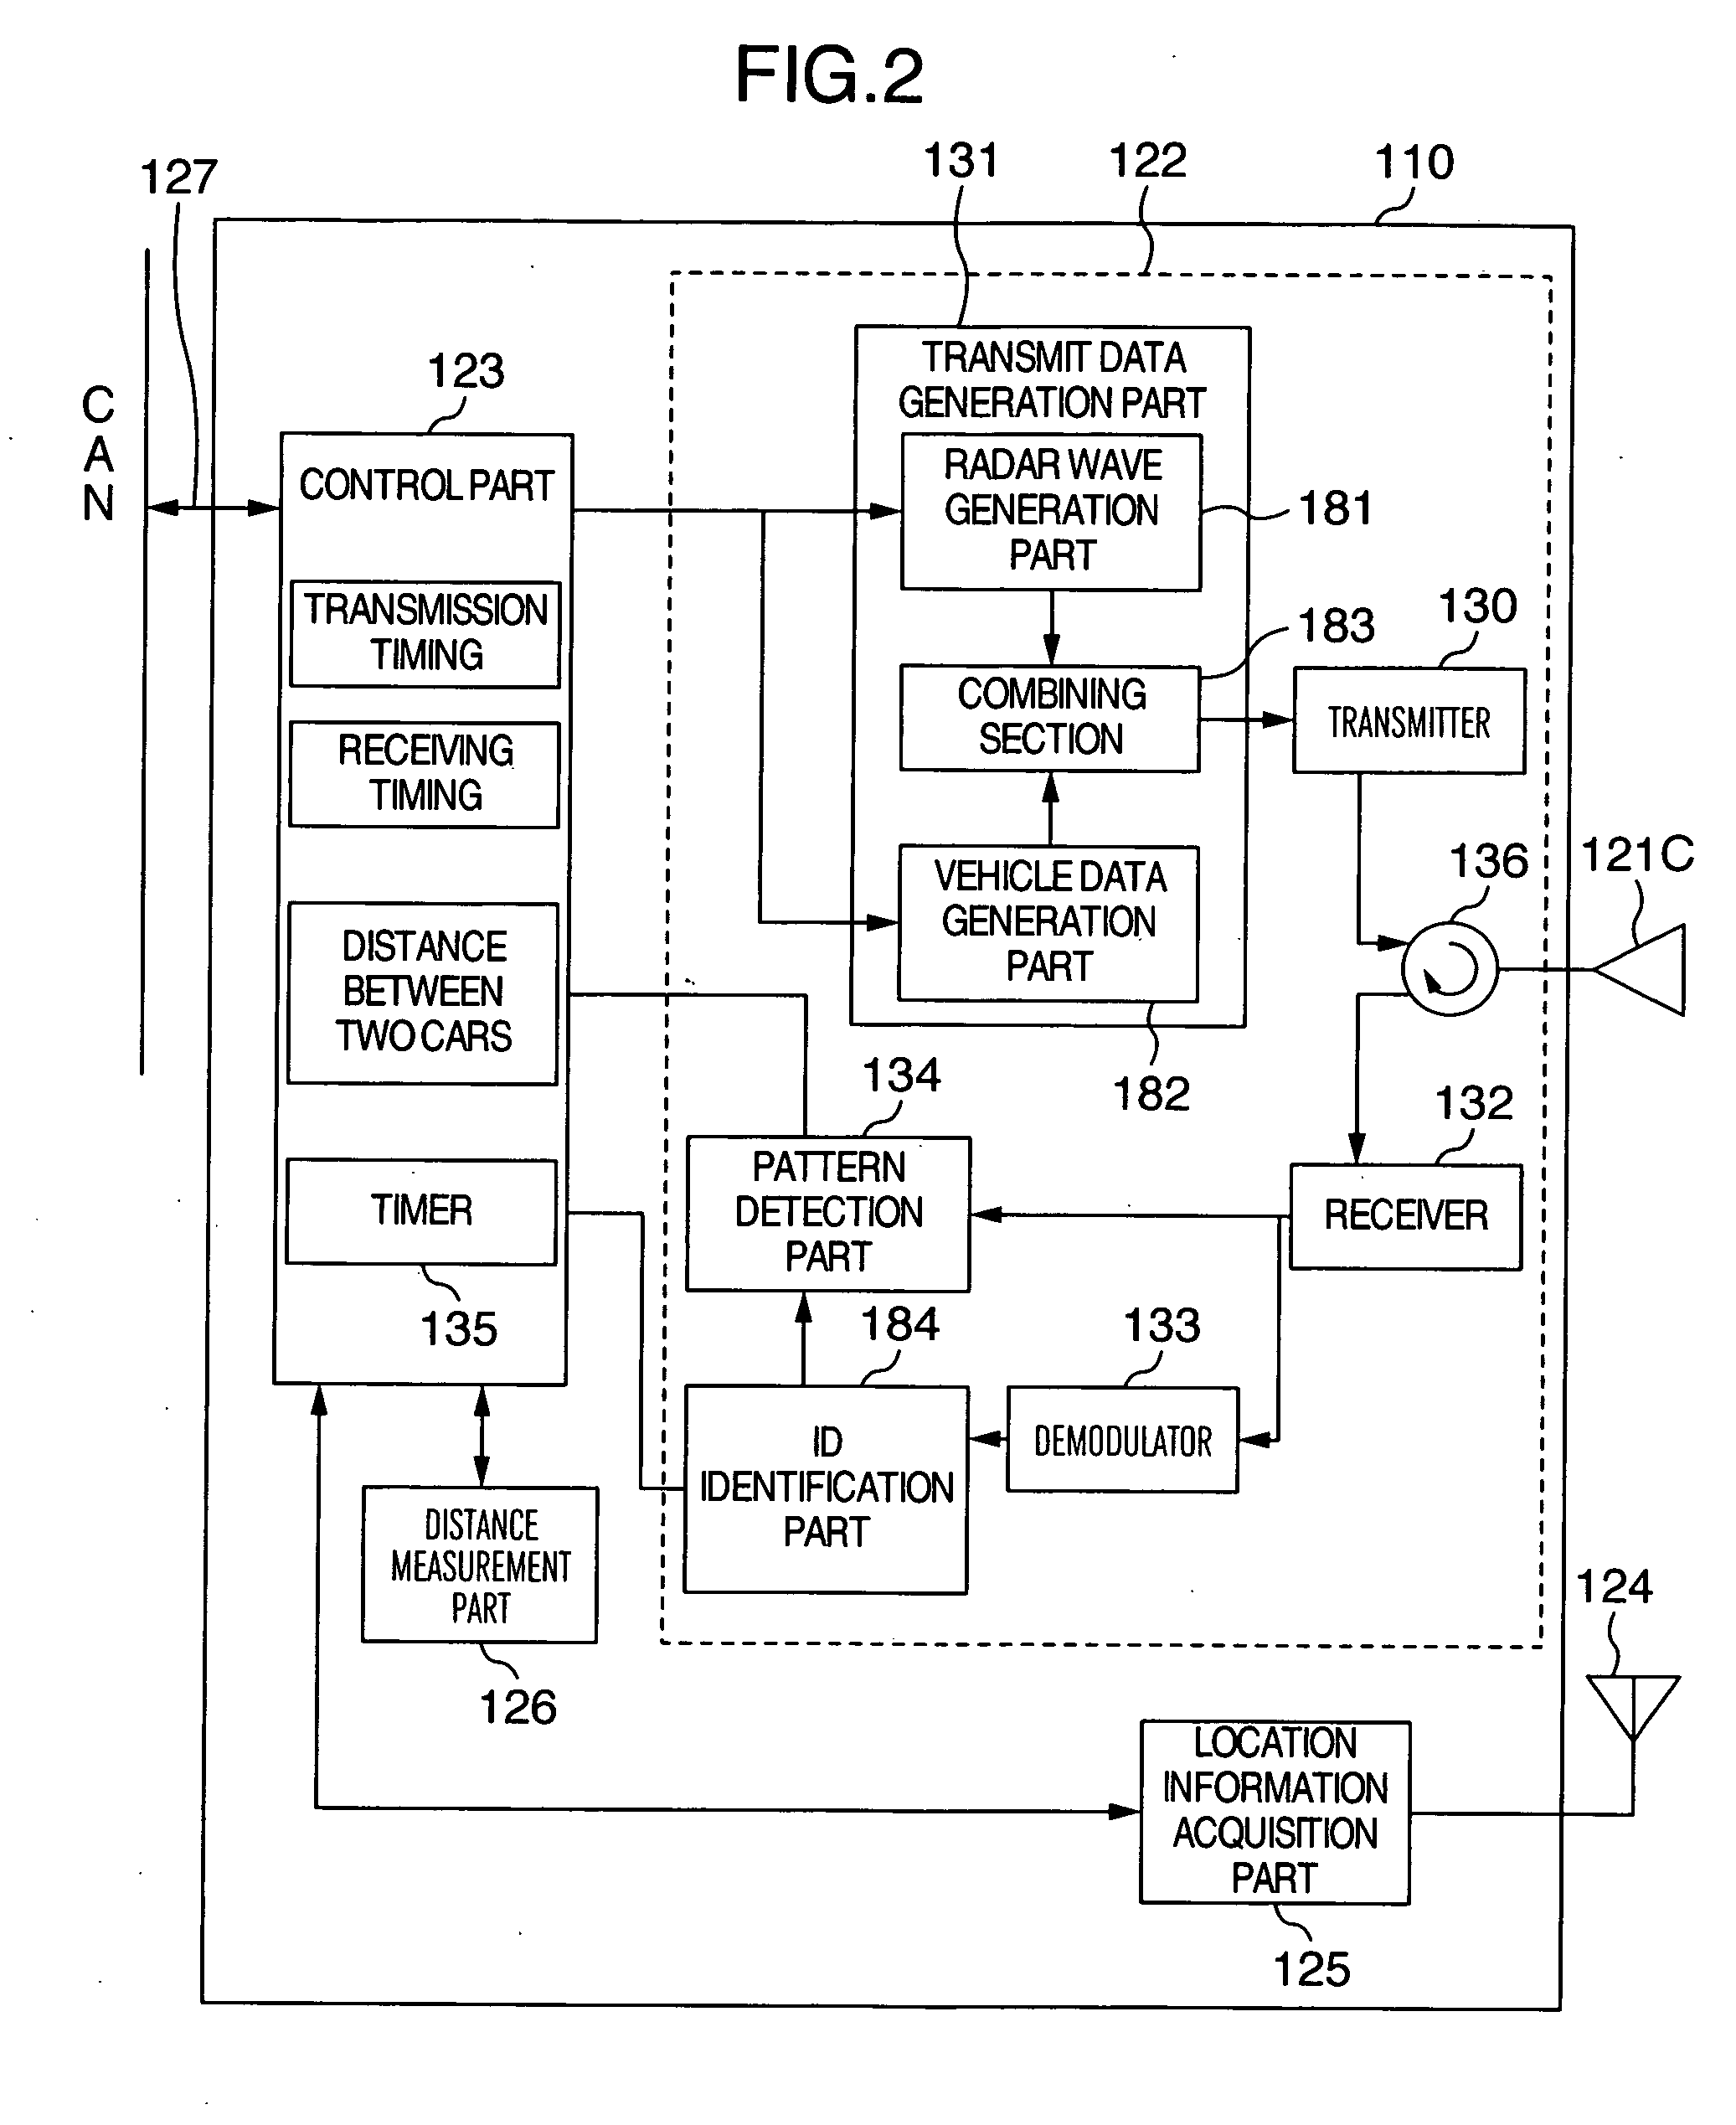 In-vehicle radar device and communication device